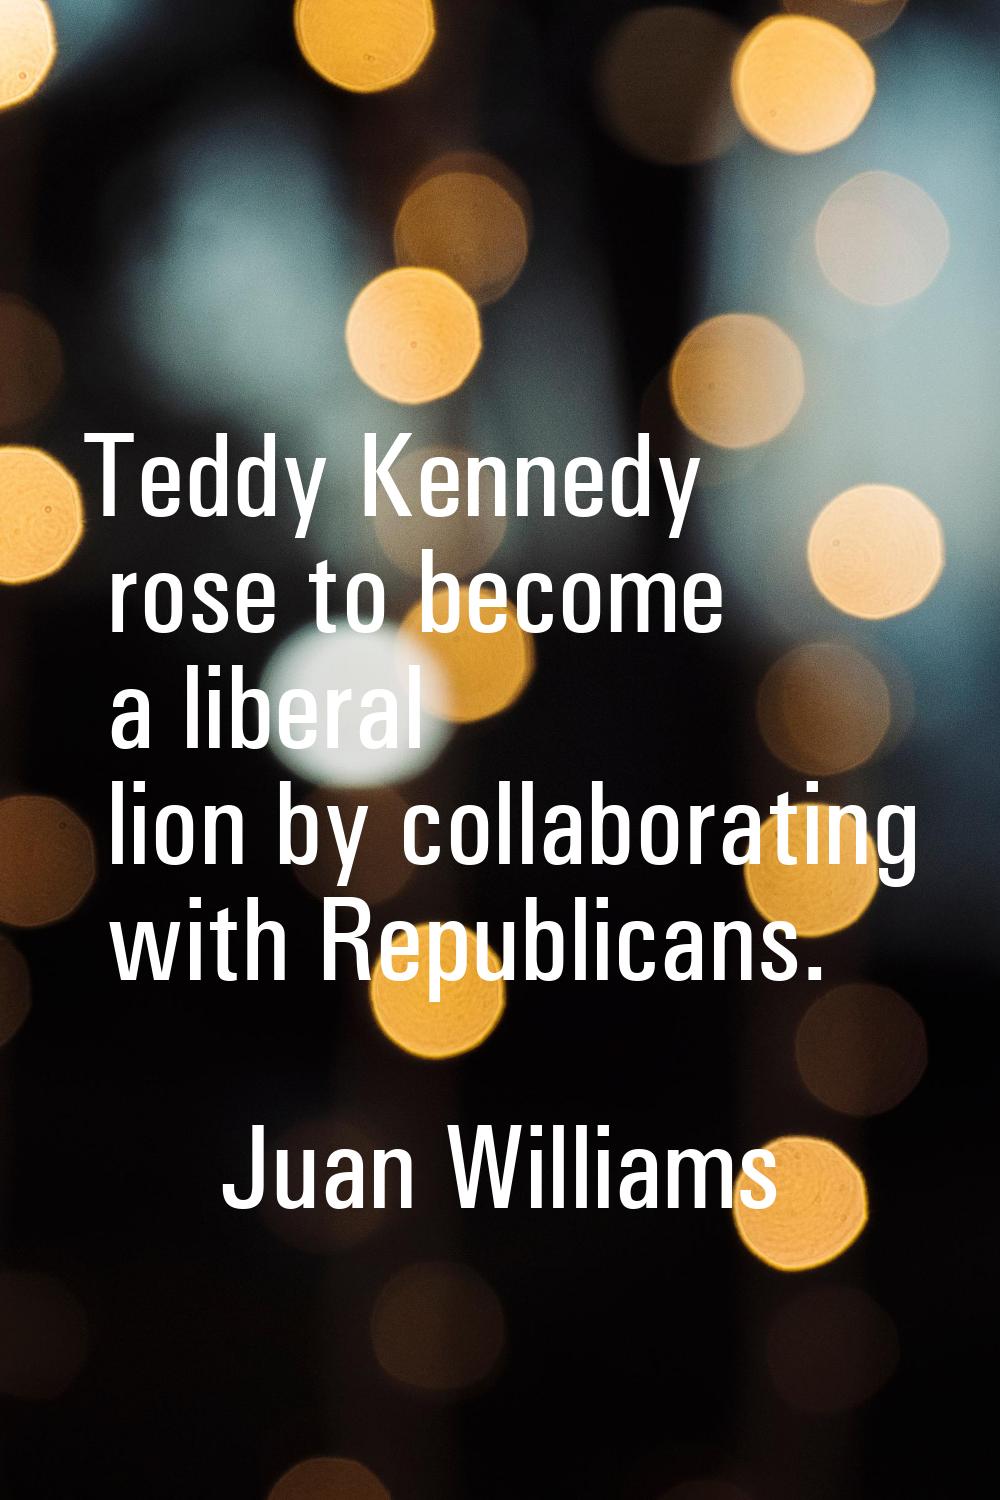 Teddy Kennedy rose to become a liberal lion by collaborating with Republicans.